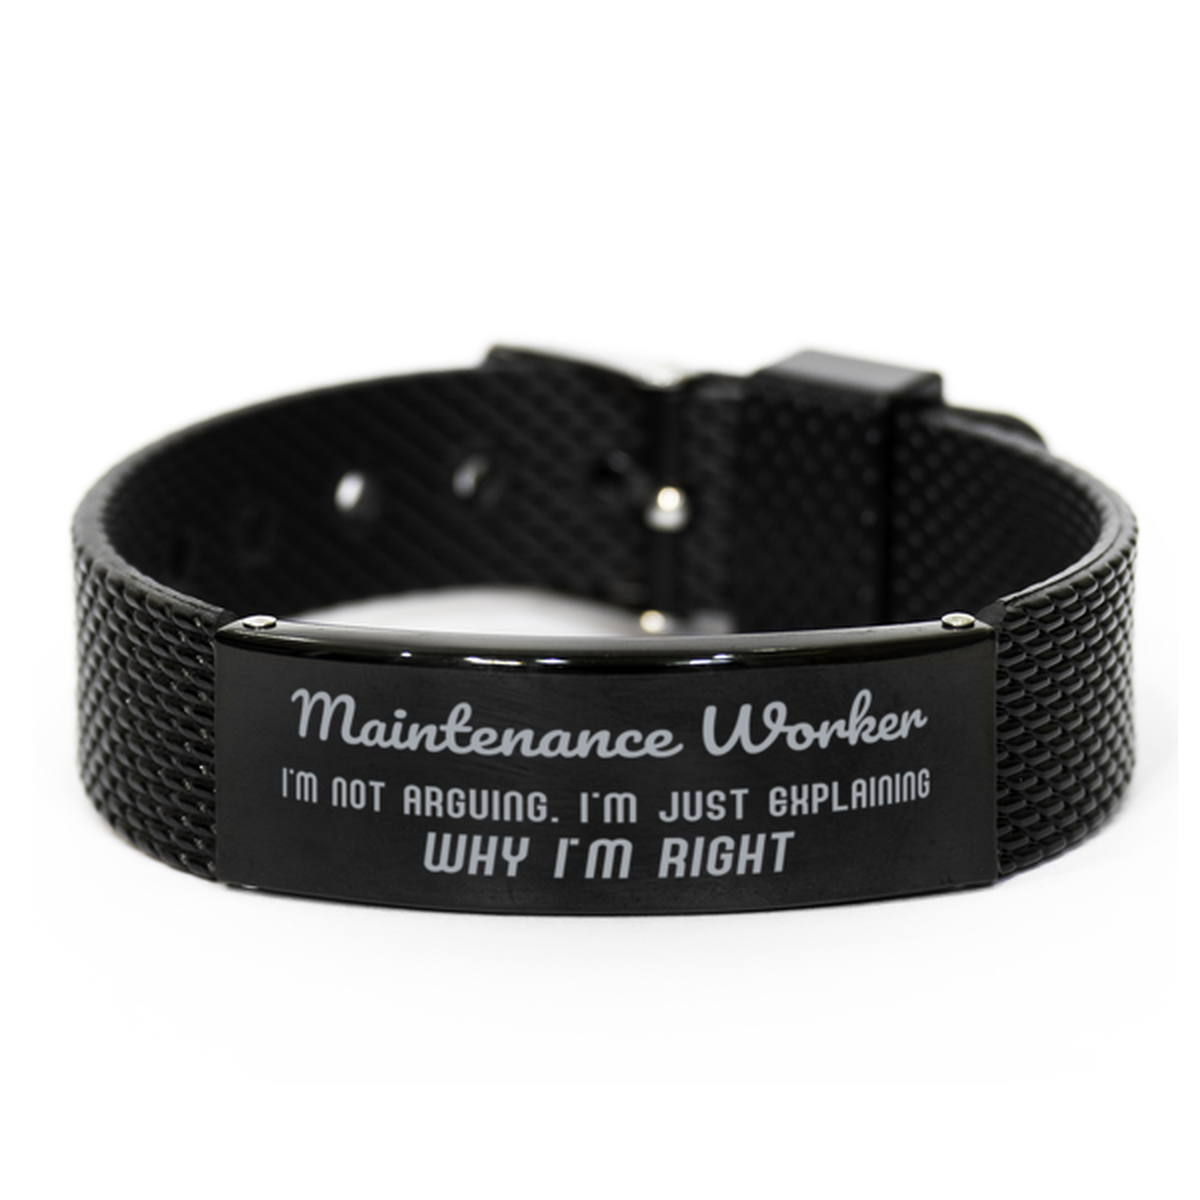 Maintenance Worker I'm not Arguing. I'm Just Explaining Why I'm RIGHT Black Shark Mesh Bracelet, Funny Saying Quote Maintenance Worker Gifts For Maintenance Worker Graduation Birthday Christmas Gifts for Men Women Coworker